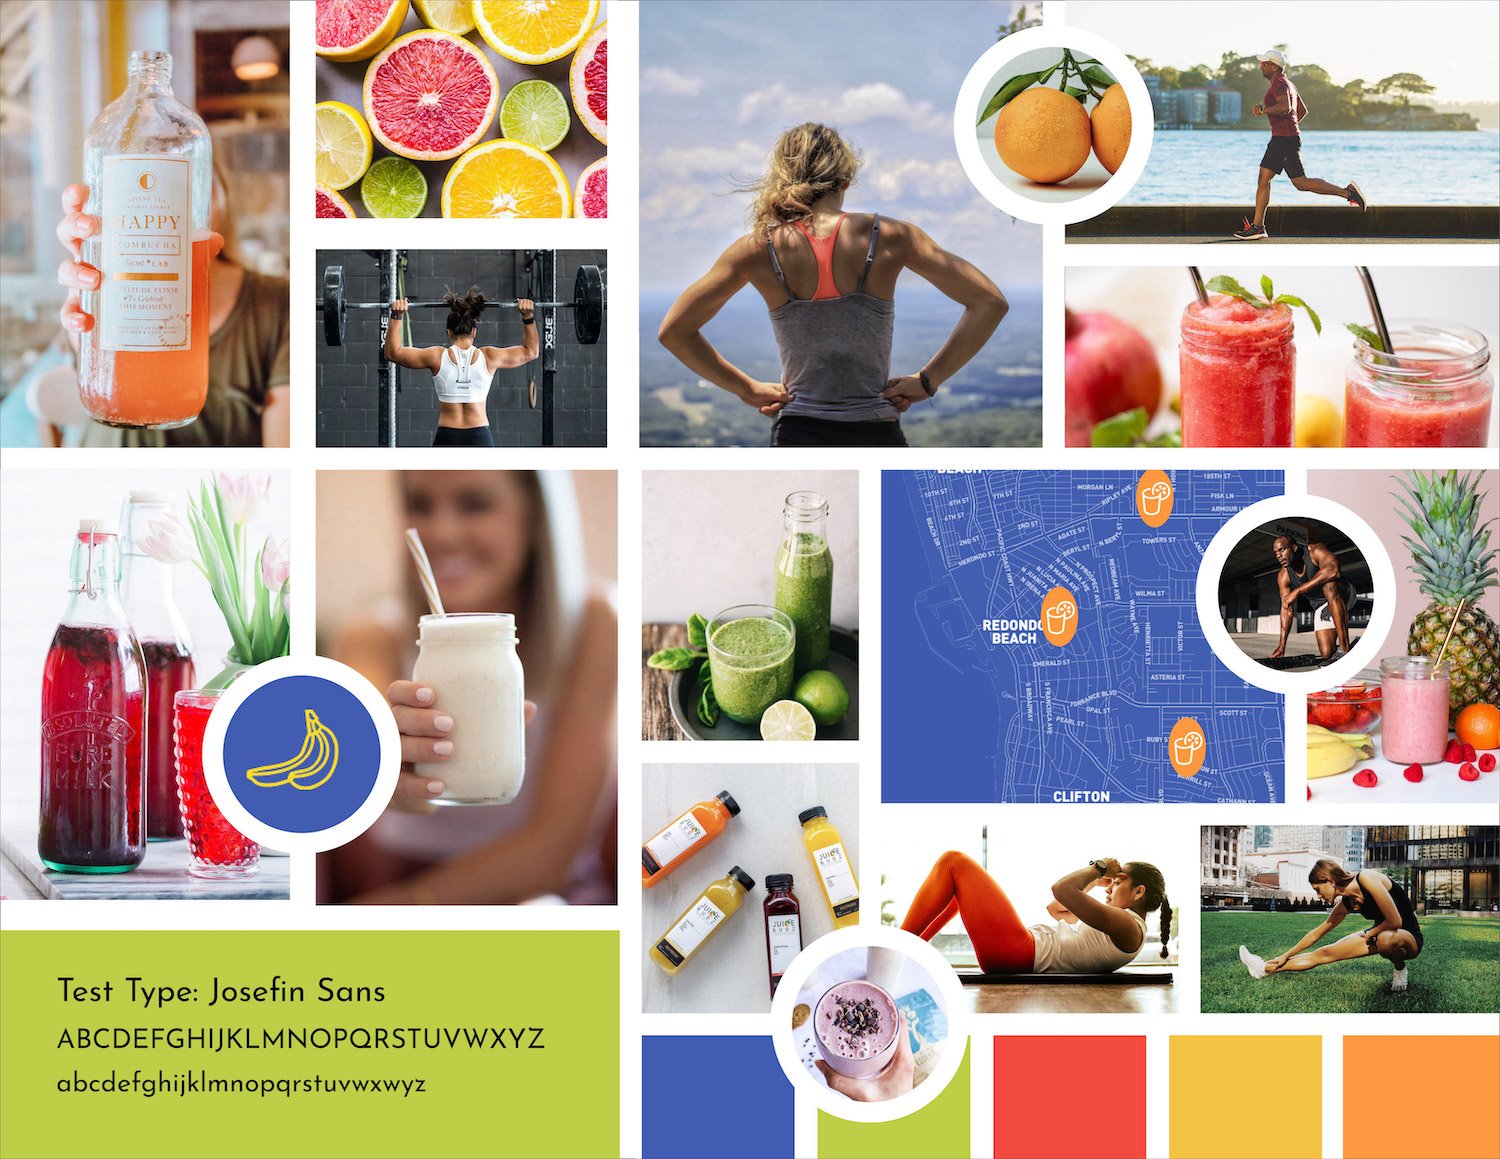 Brand strategy mood board for a juice bar for athletes by Chris Olson